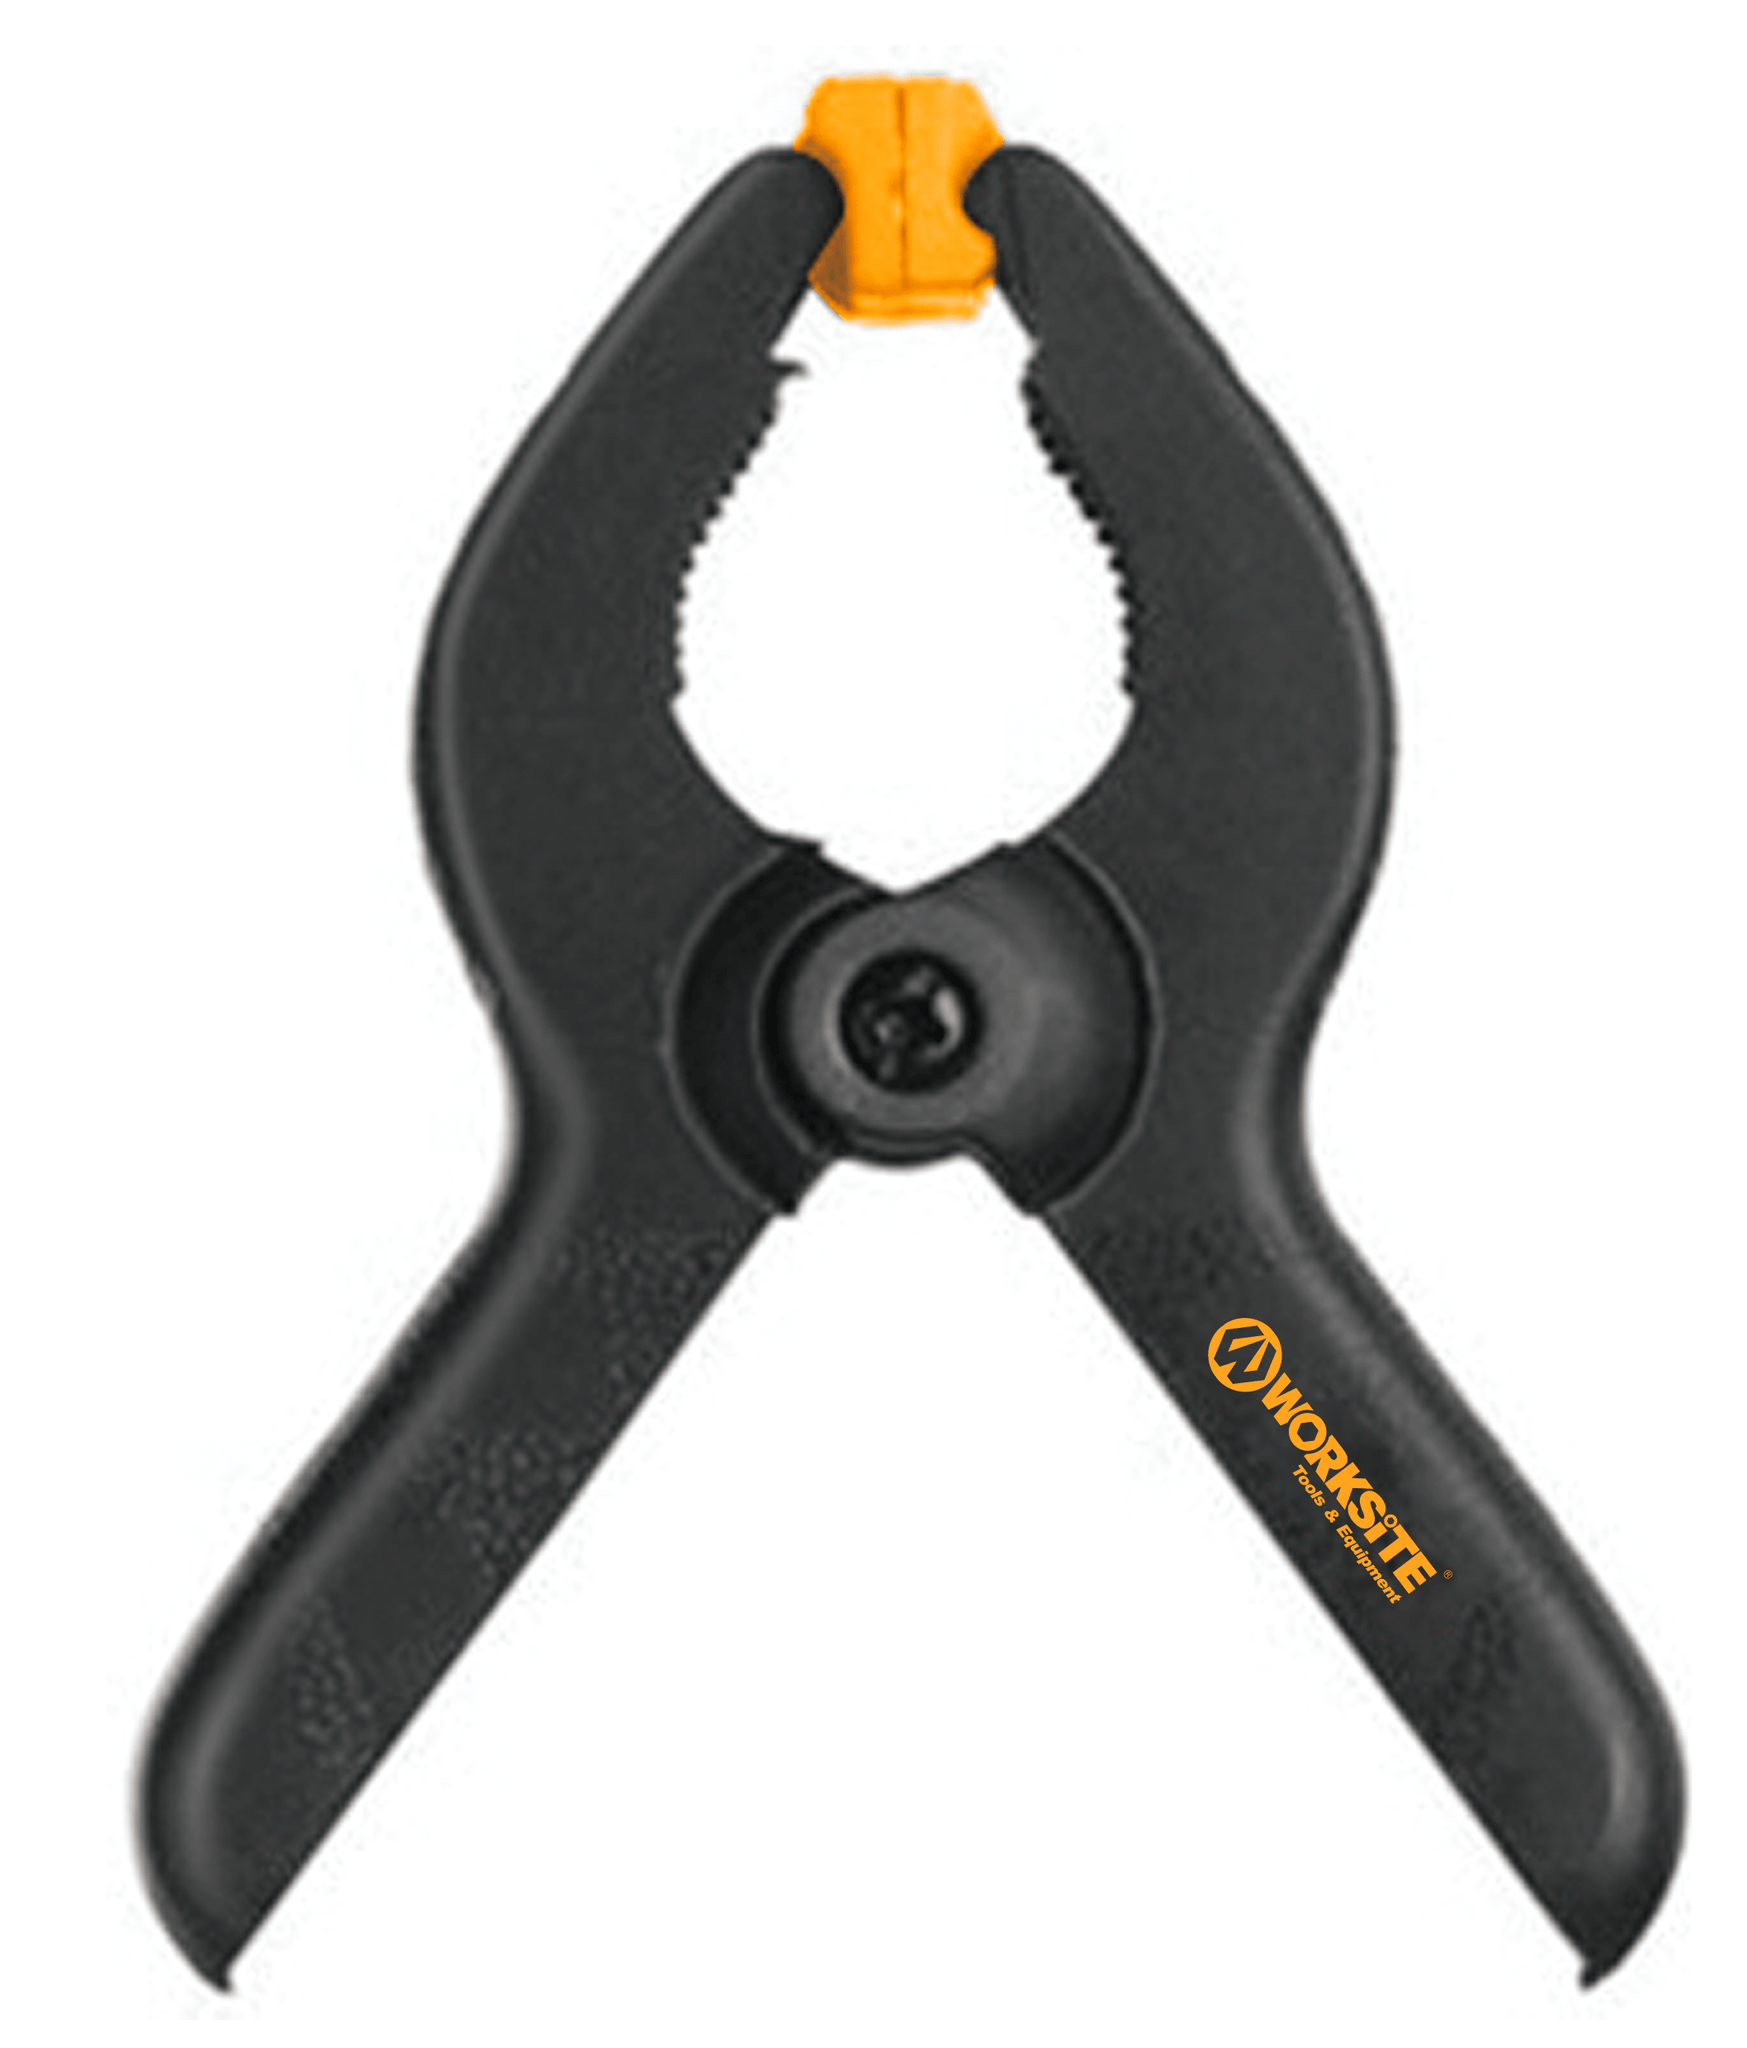 WORKSITE 6 Inch Spring Clamp. Heavy Duty Plastic Vice Grip – Quick Grip Clips – 6 Inch  (150millimeter). Provides Quick Grip Holding Power During Assembly, Fastening, And Gluing Work - WT9335